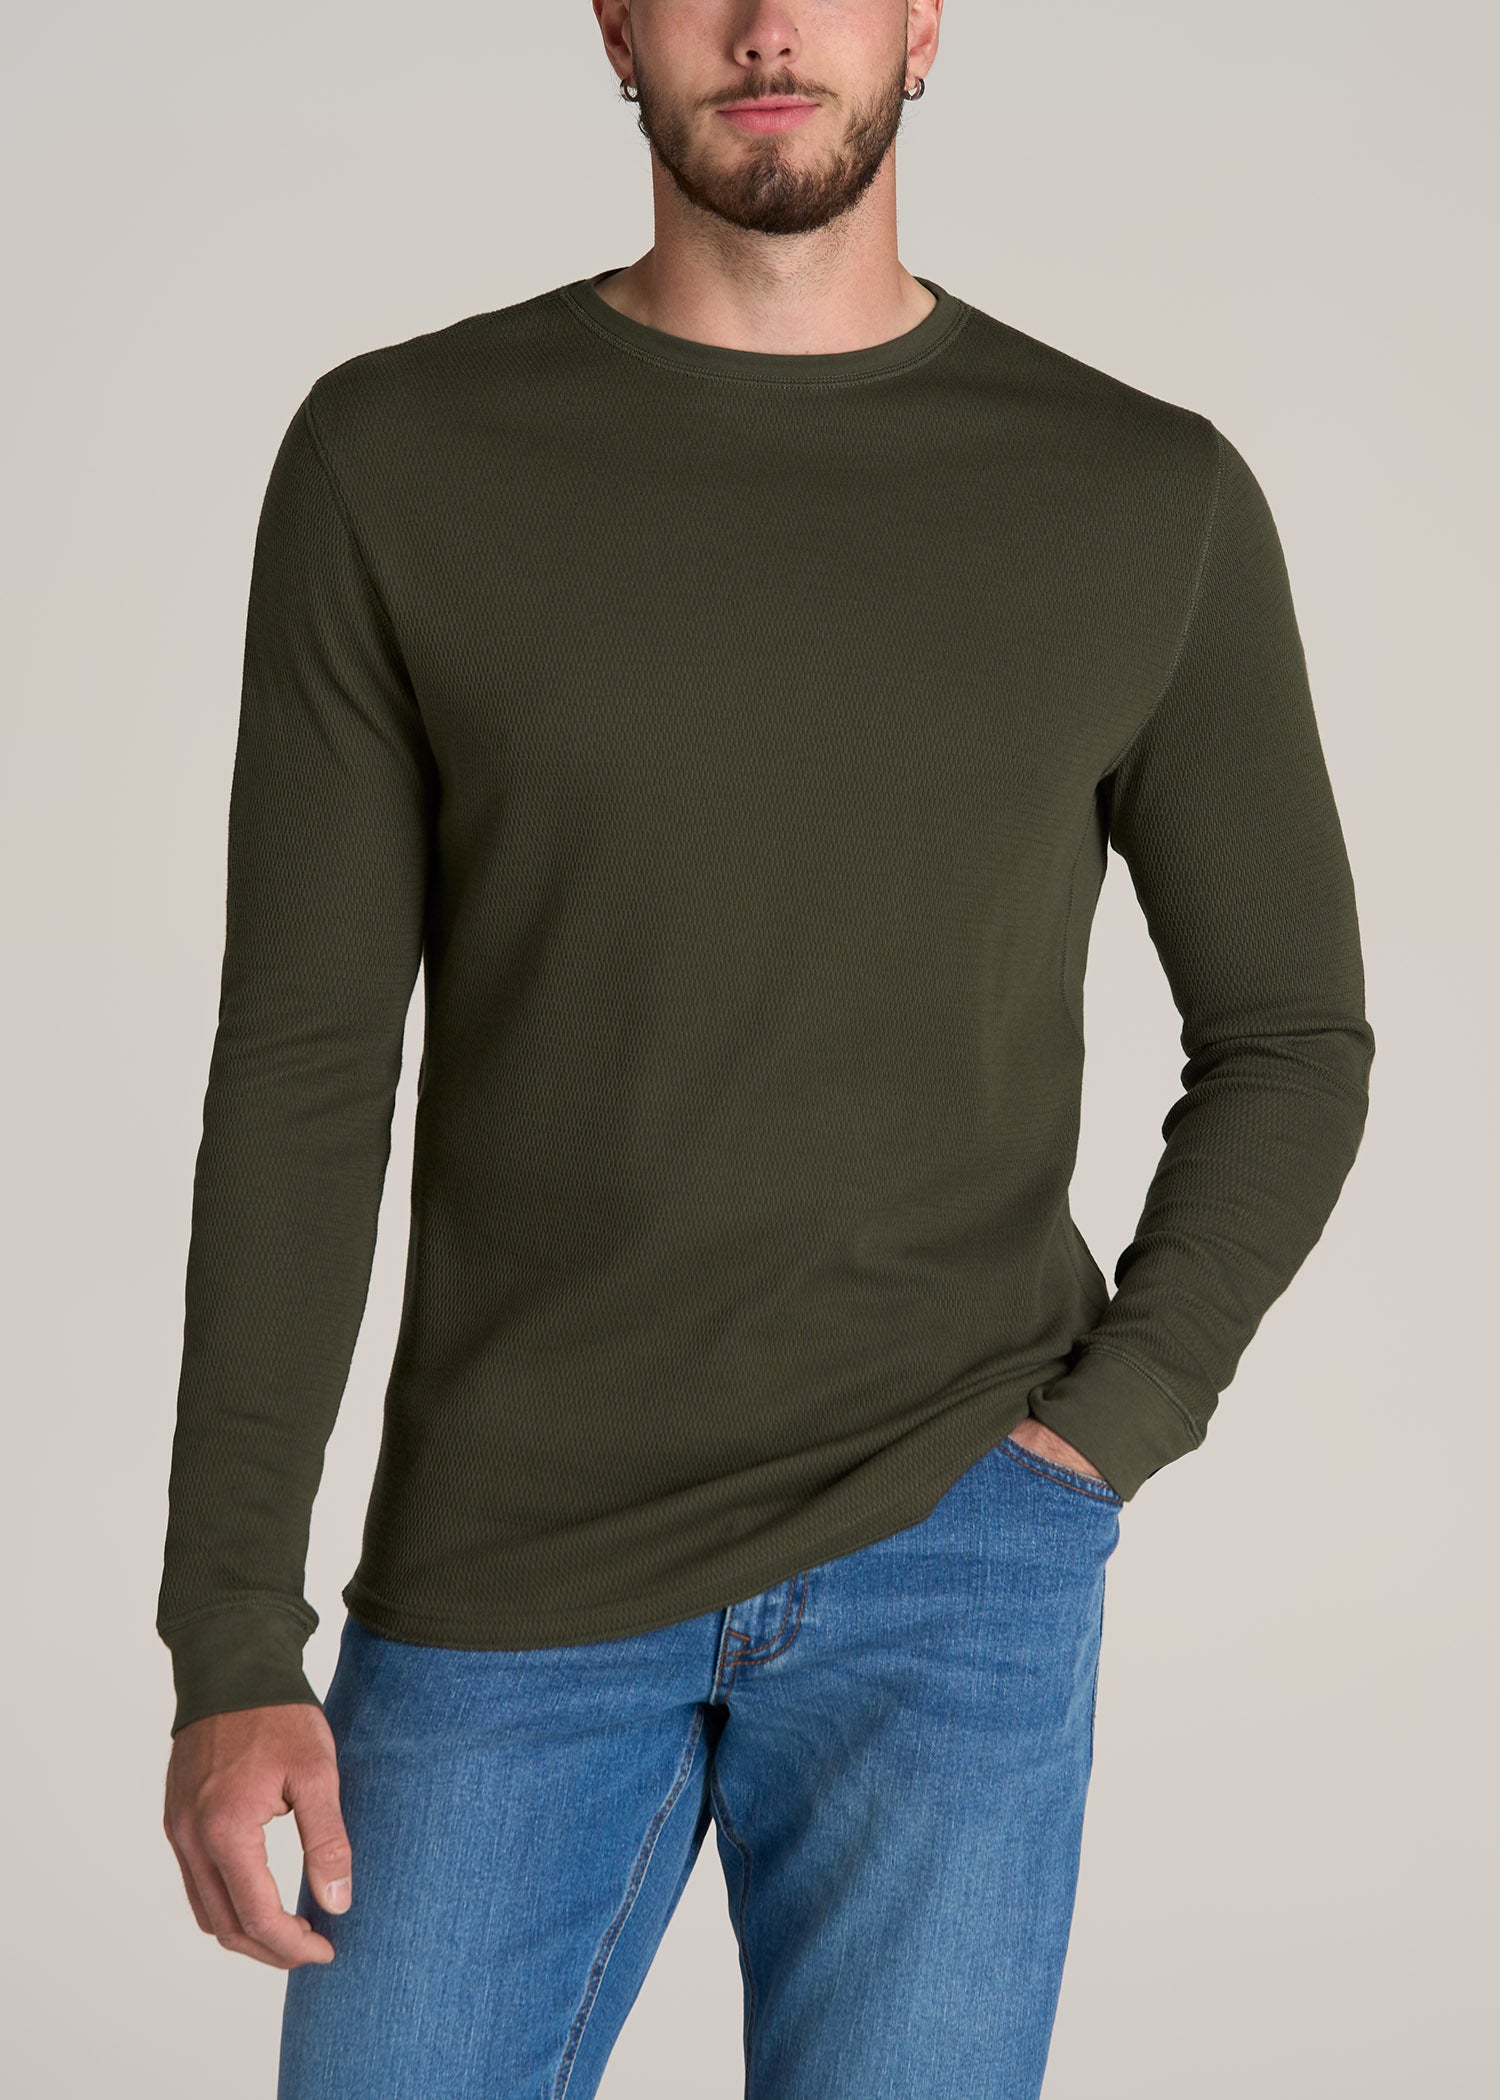 American-Tall-Men-Double-Honeycomb-Thermal-Crewneck-Dark-Olive-Green-front